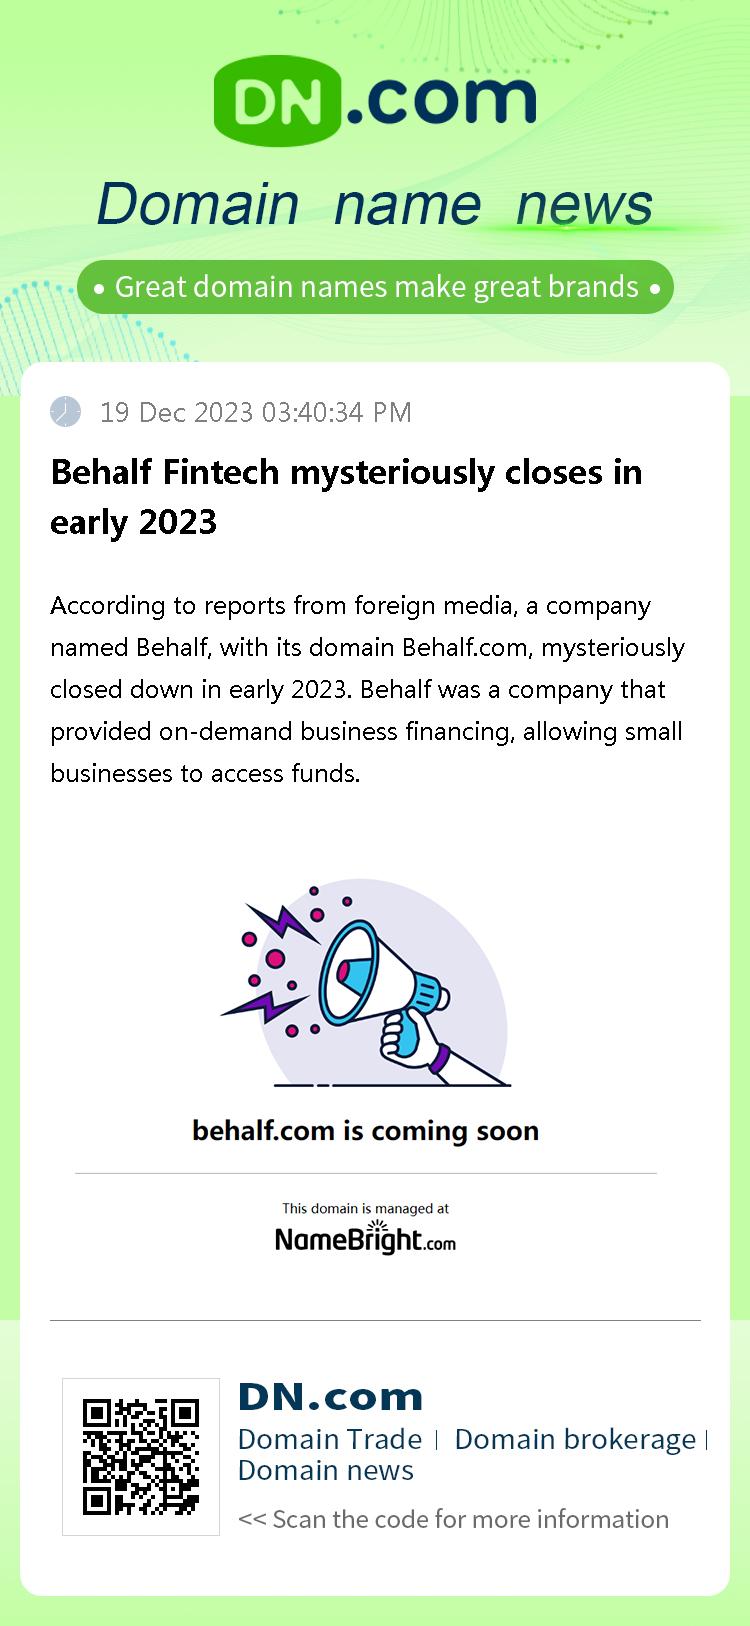 Behalf Fintech mysteriously closes in early 2023